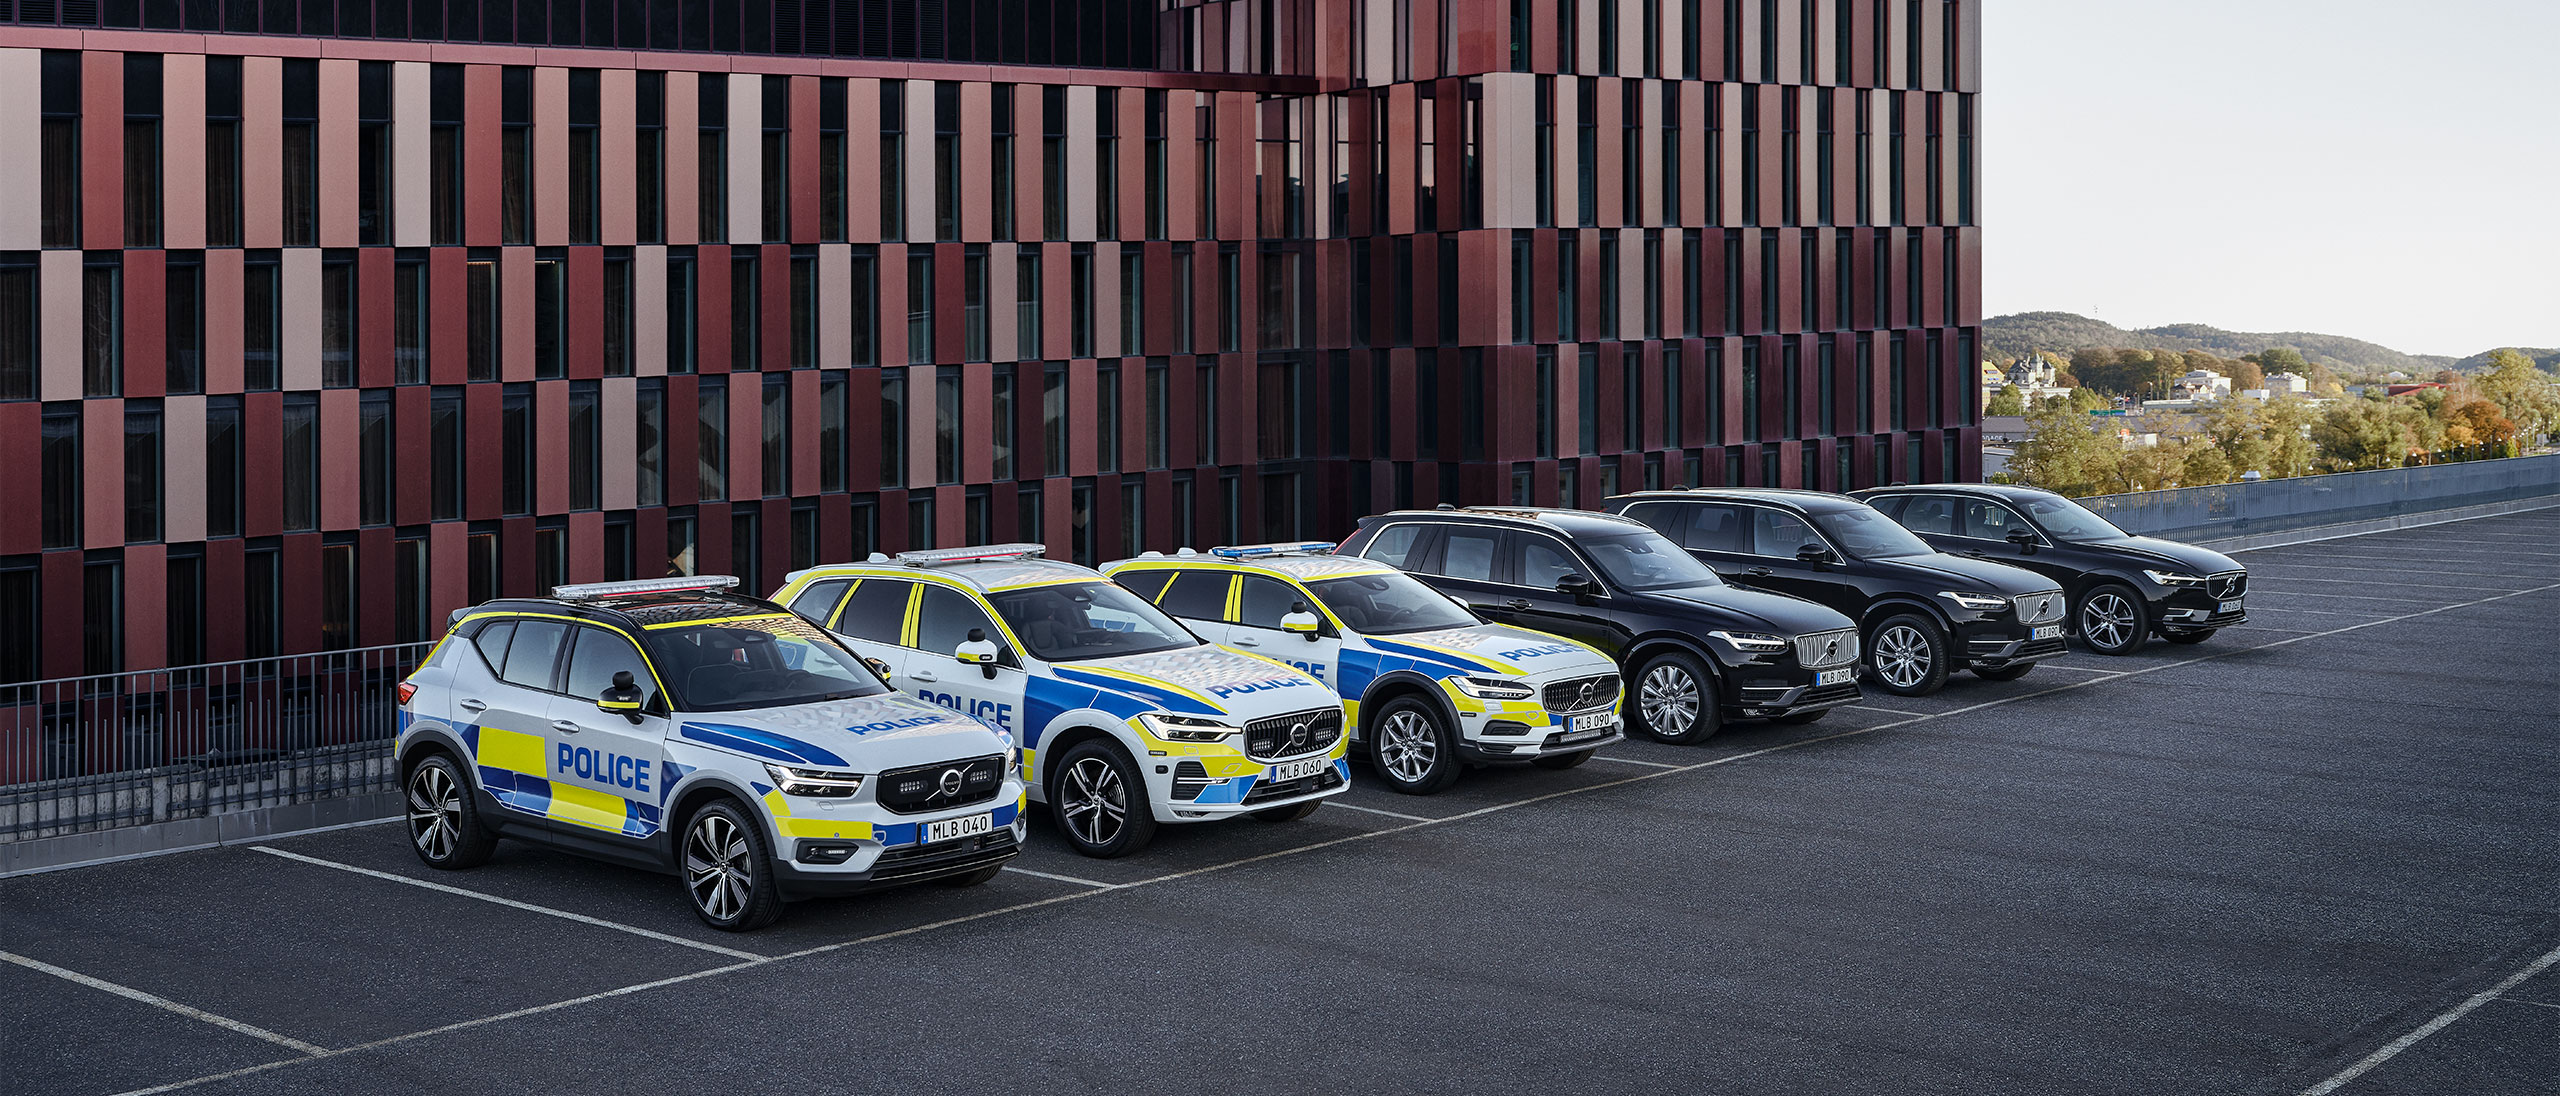 Three Volvo police cars and three armoured Volvo SUVs parked outside an official building